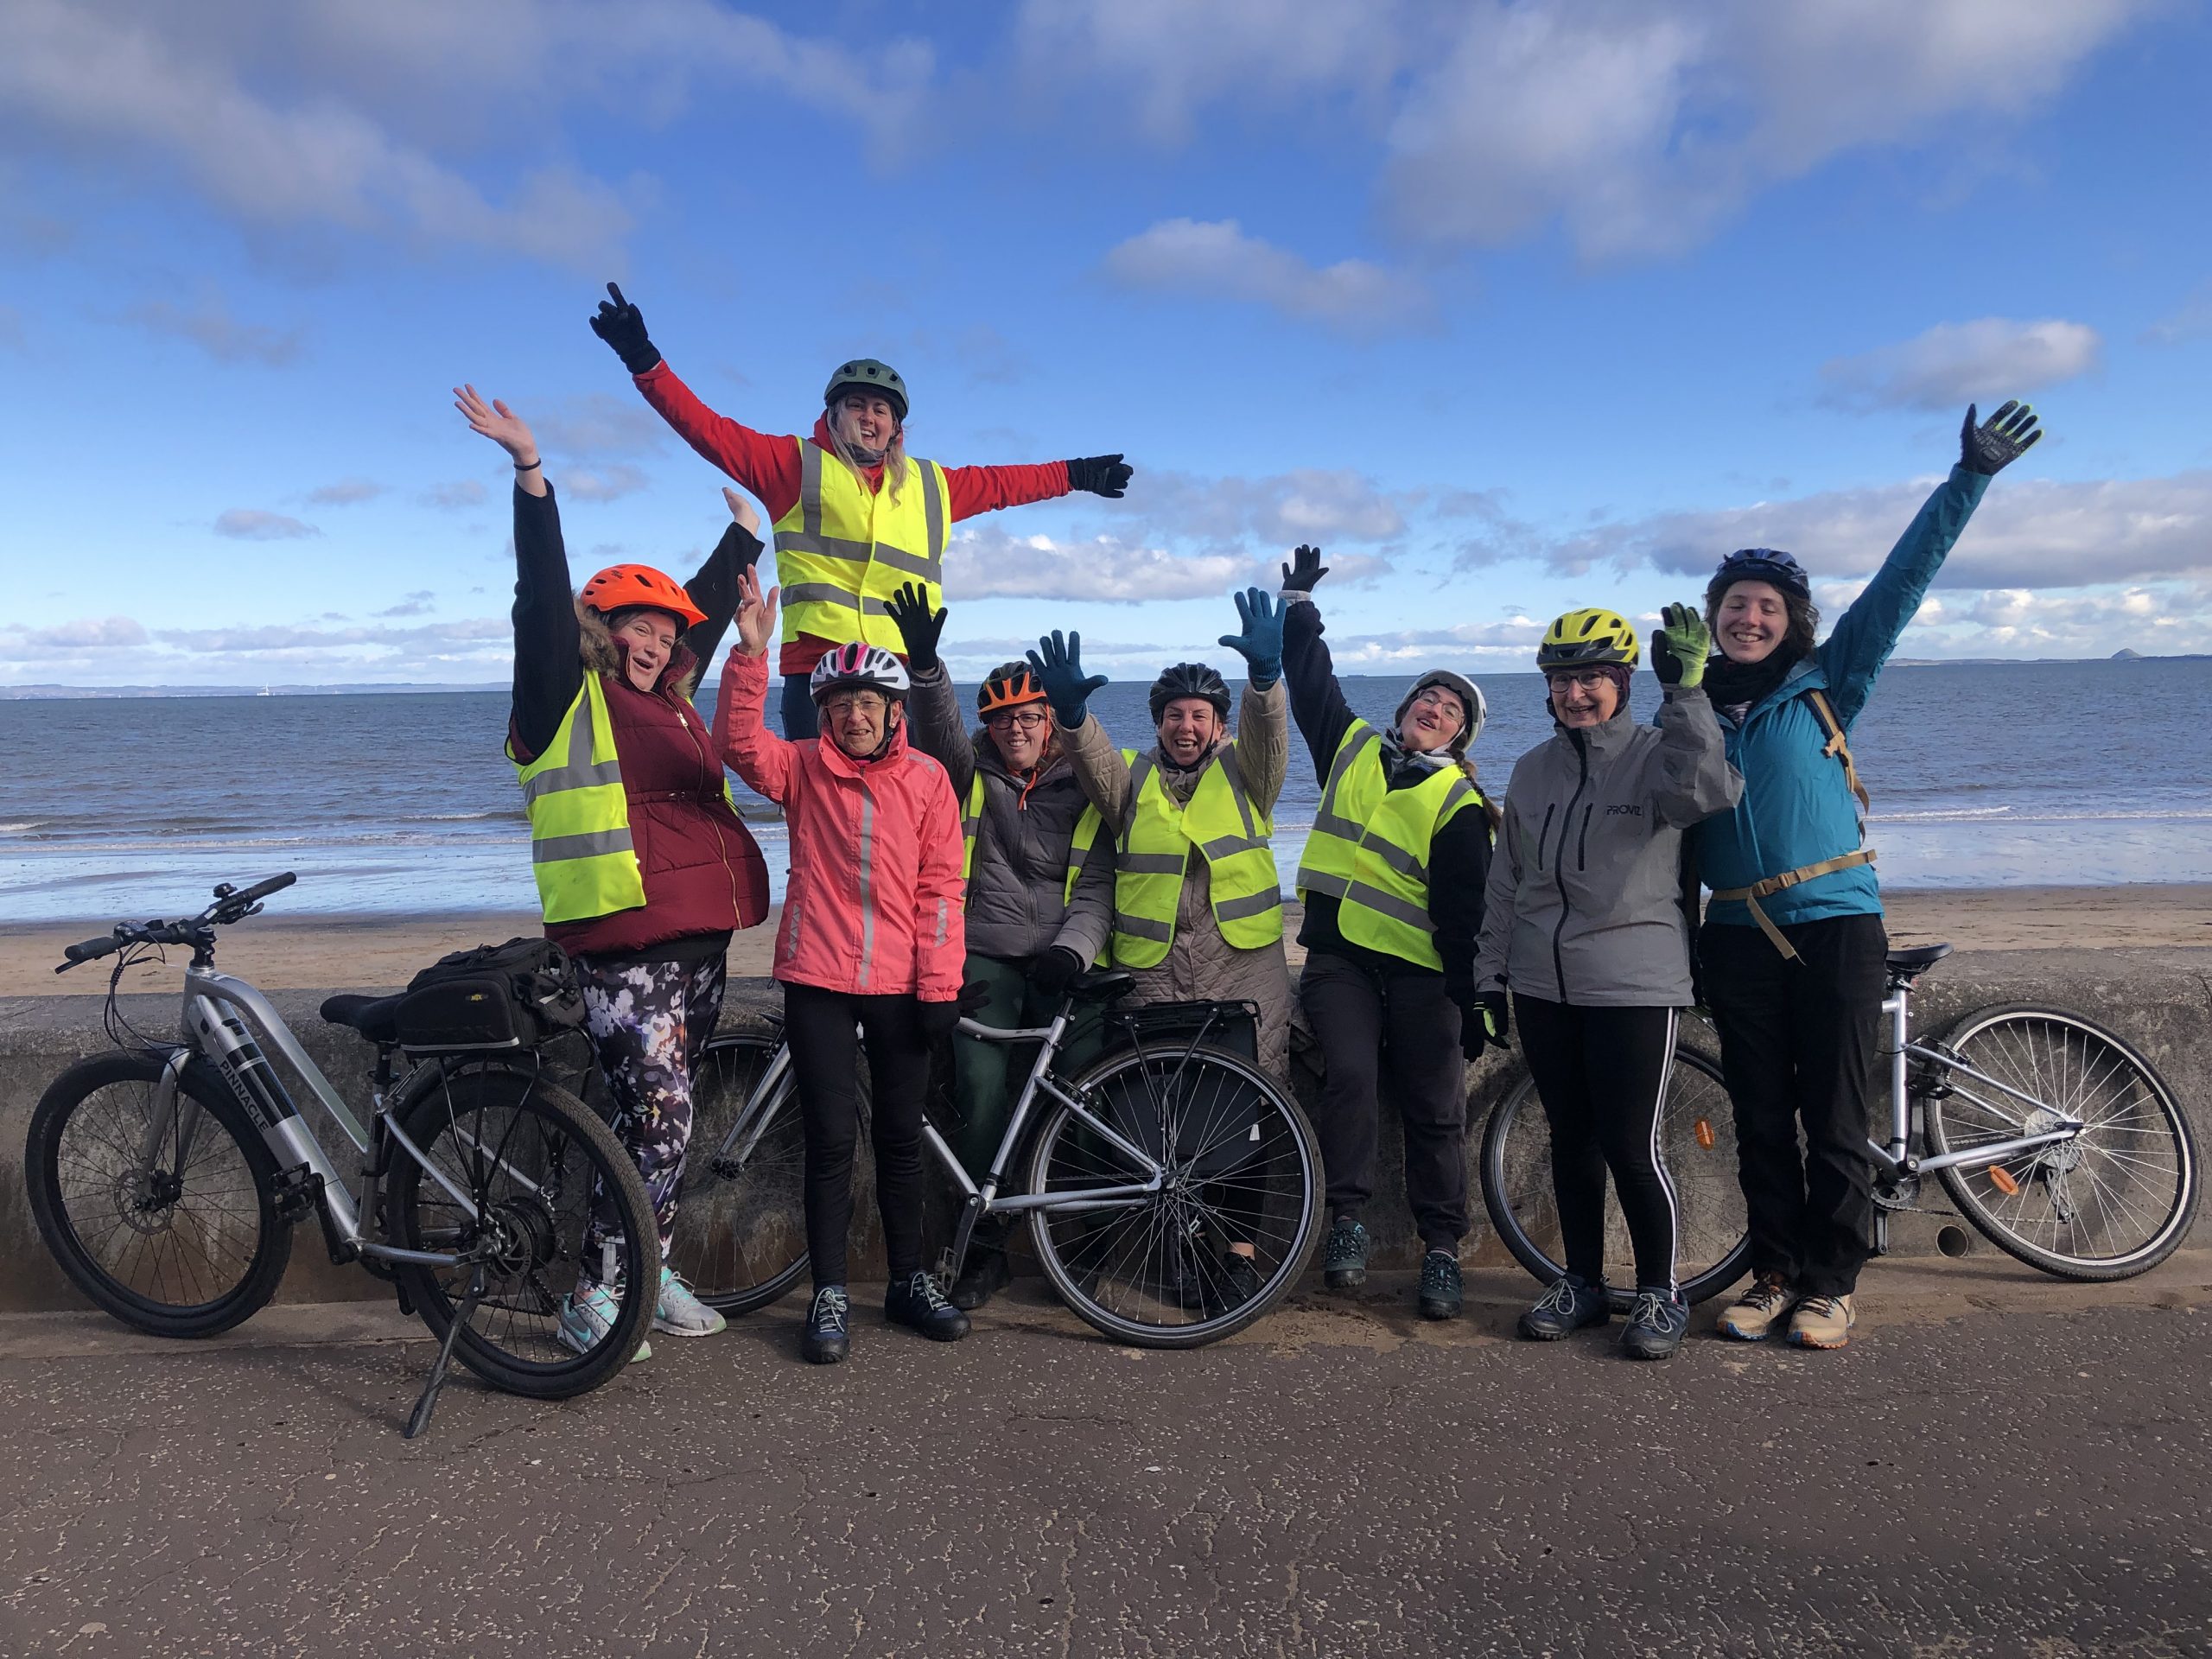 Bridgend Farmhouse Community led ride. Image shows a group of people who have been on a cycle ride to Portobello, standing by the sea wall with their bikes